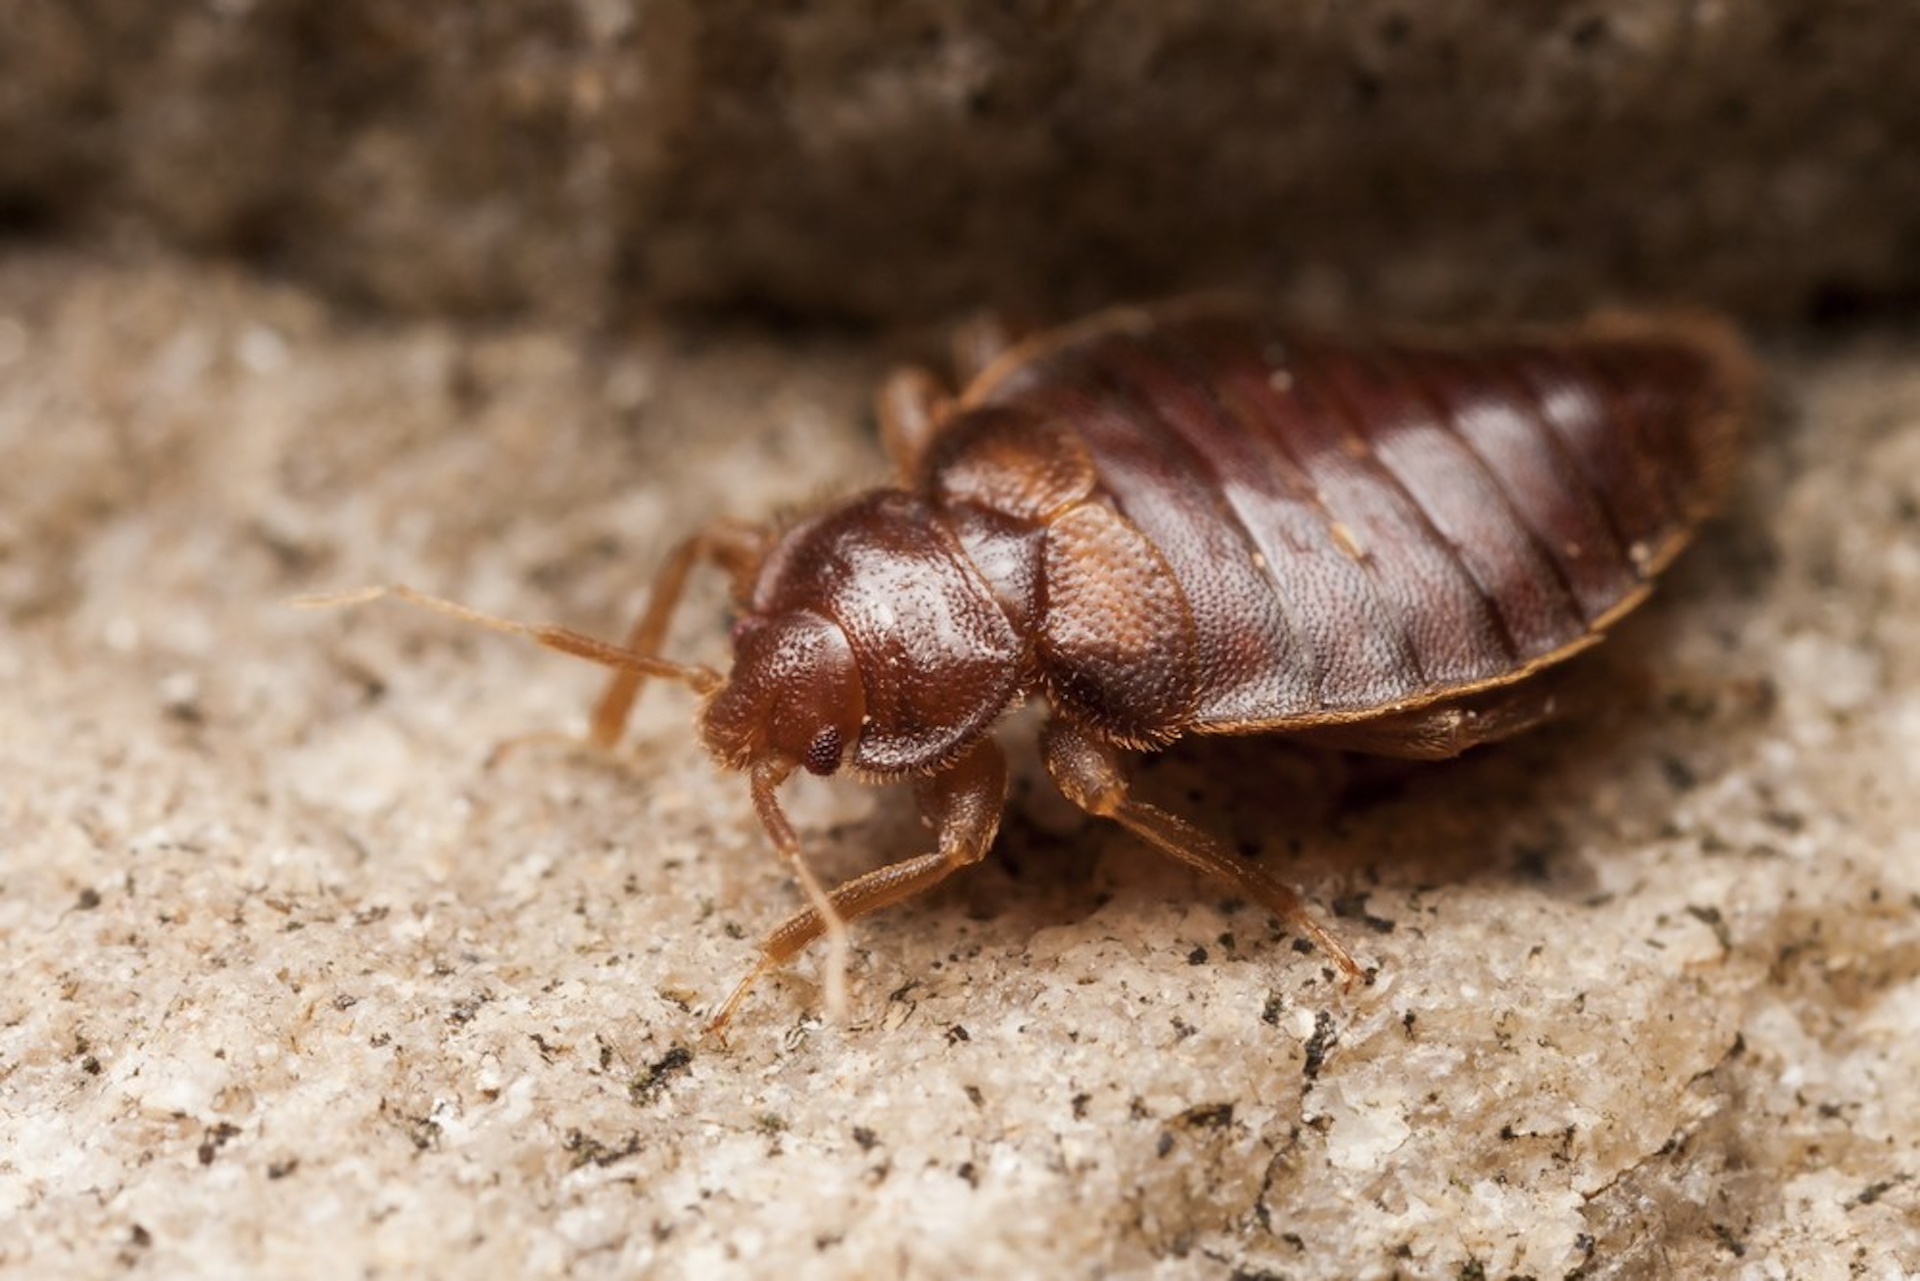 Bed bugs can hide in even the smallest cracks and crevices